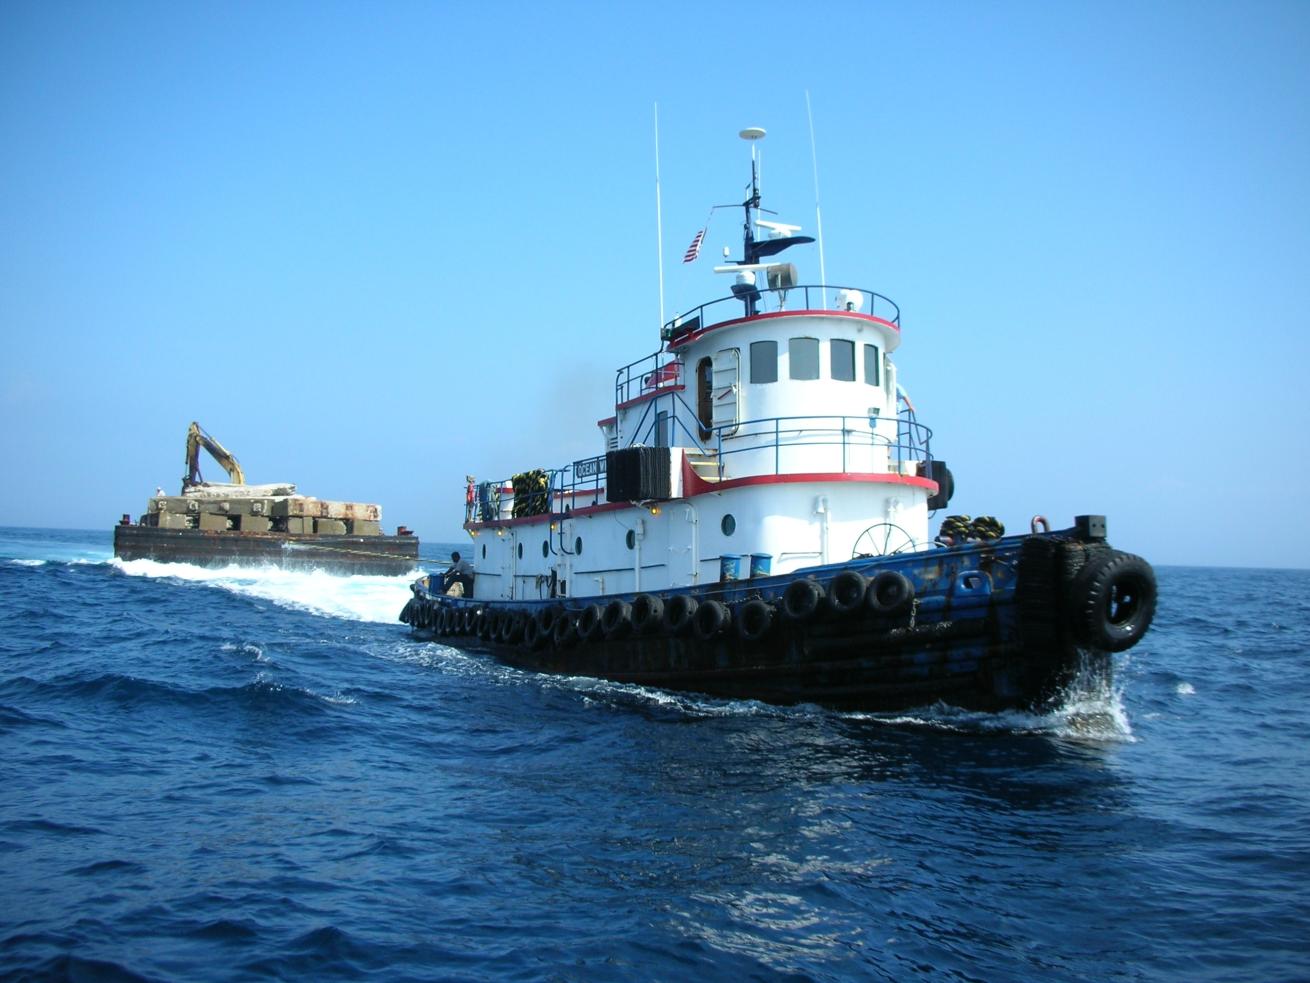 A tugboat sailing on the water